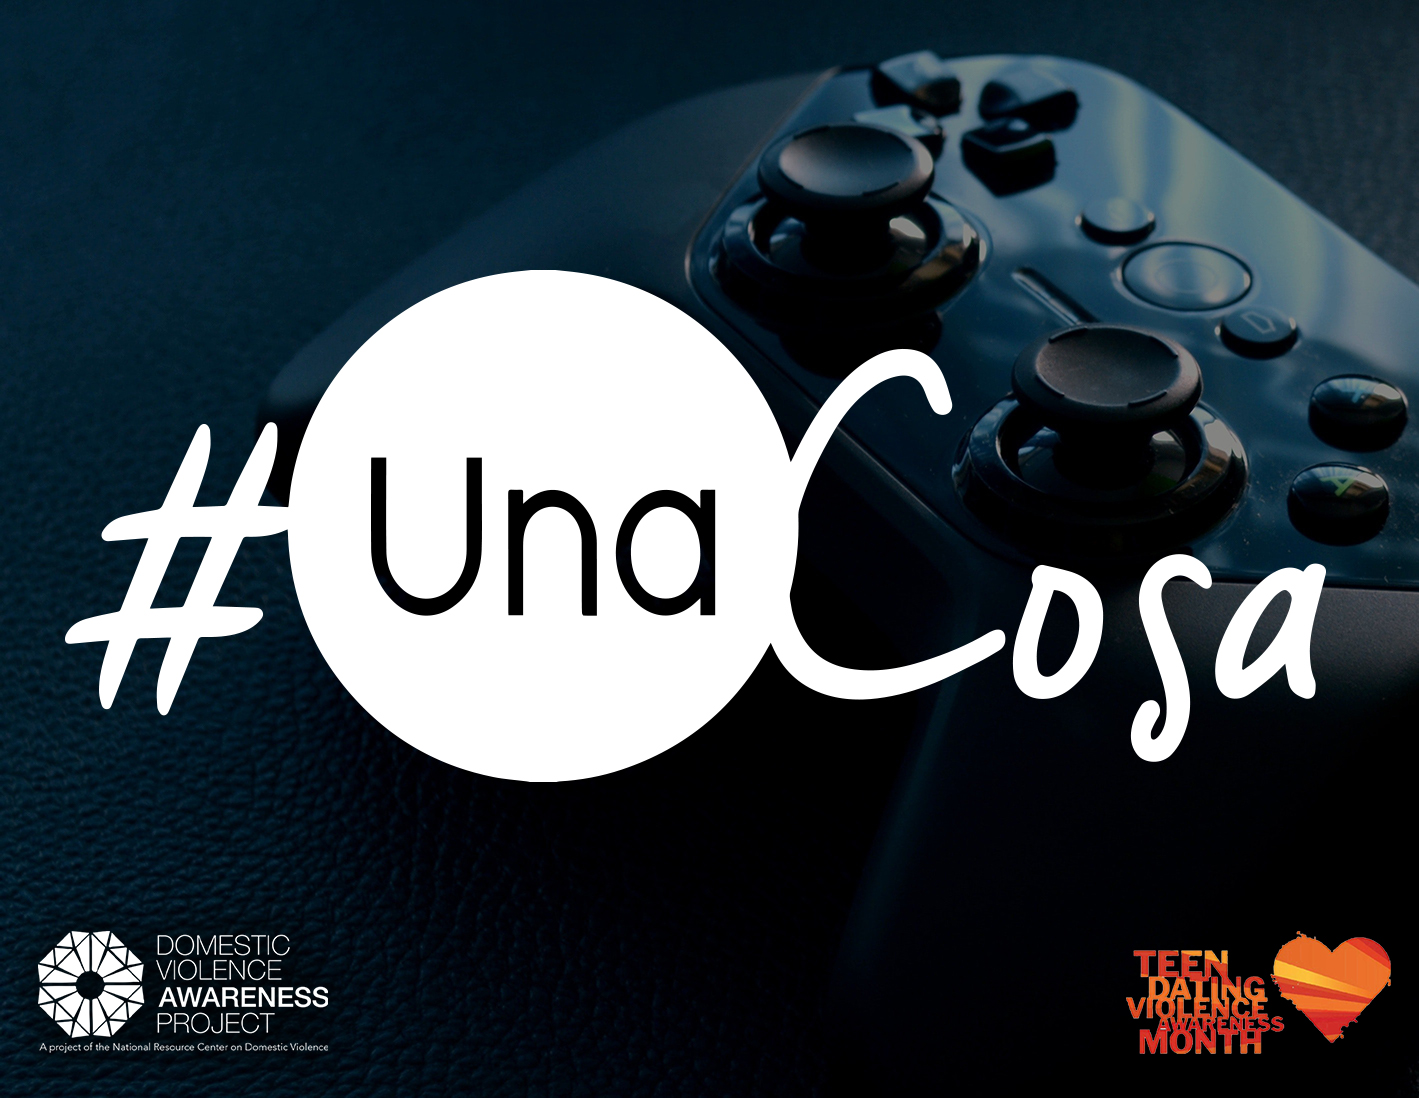 #UnaCosa logo imposed over image of gaming controller